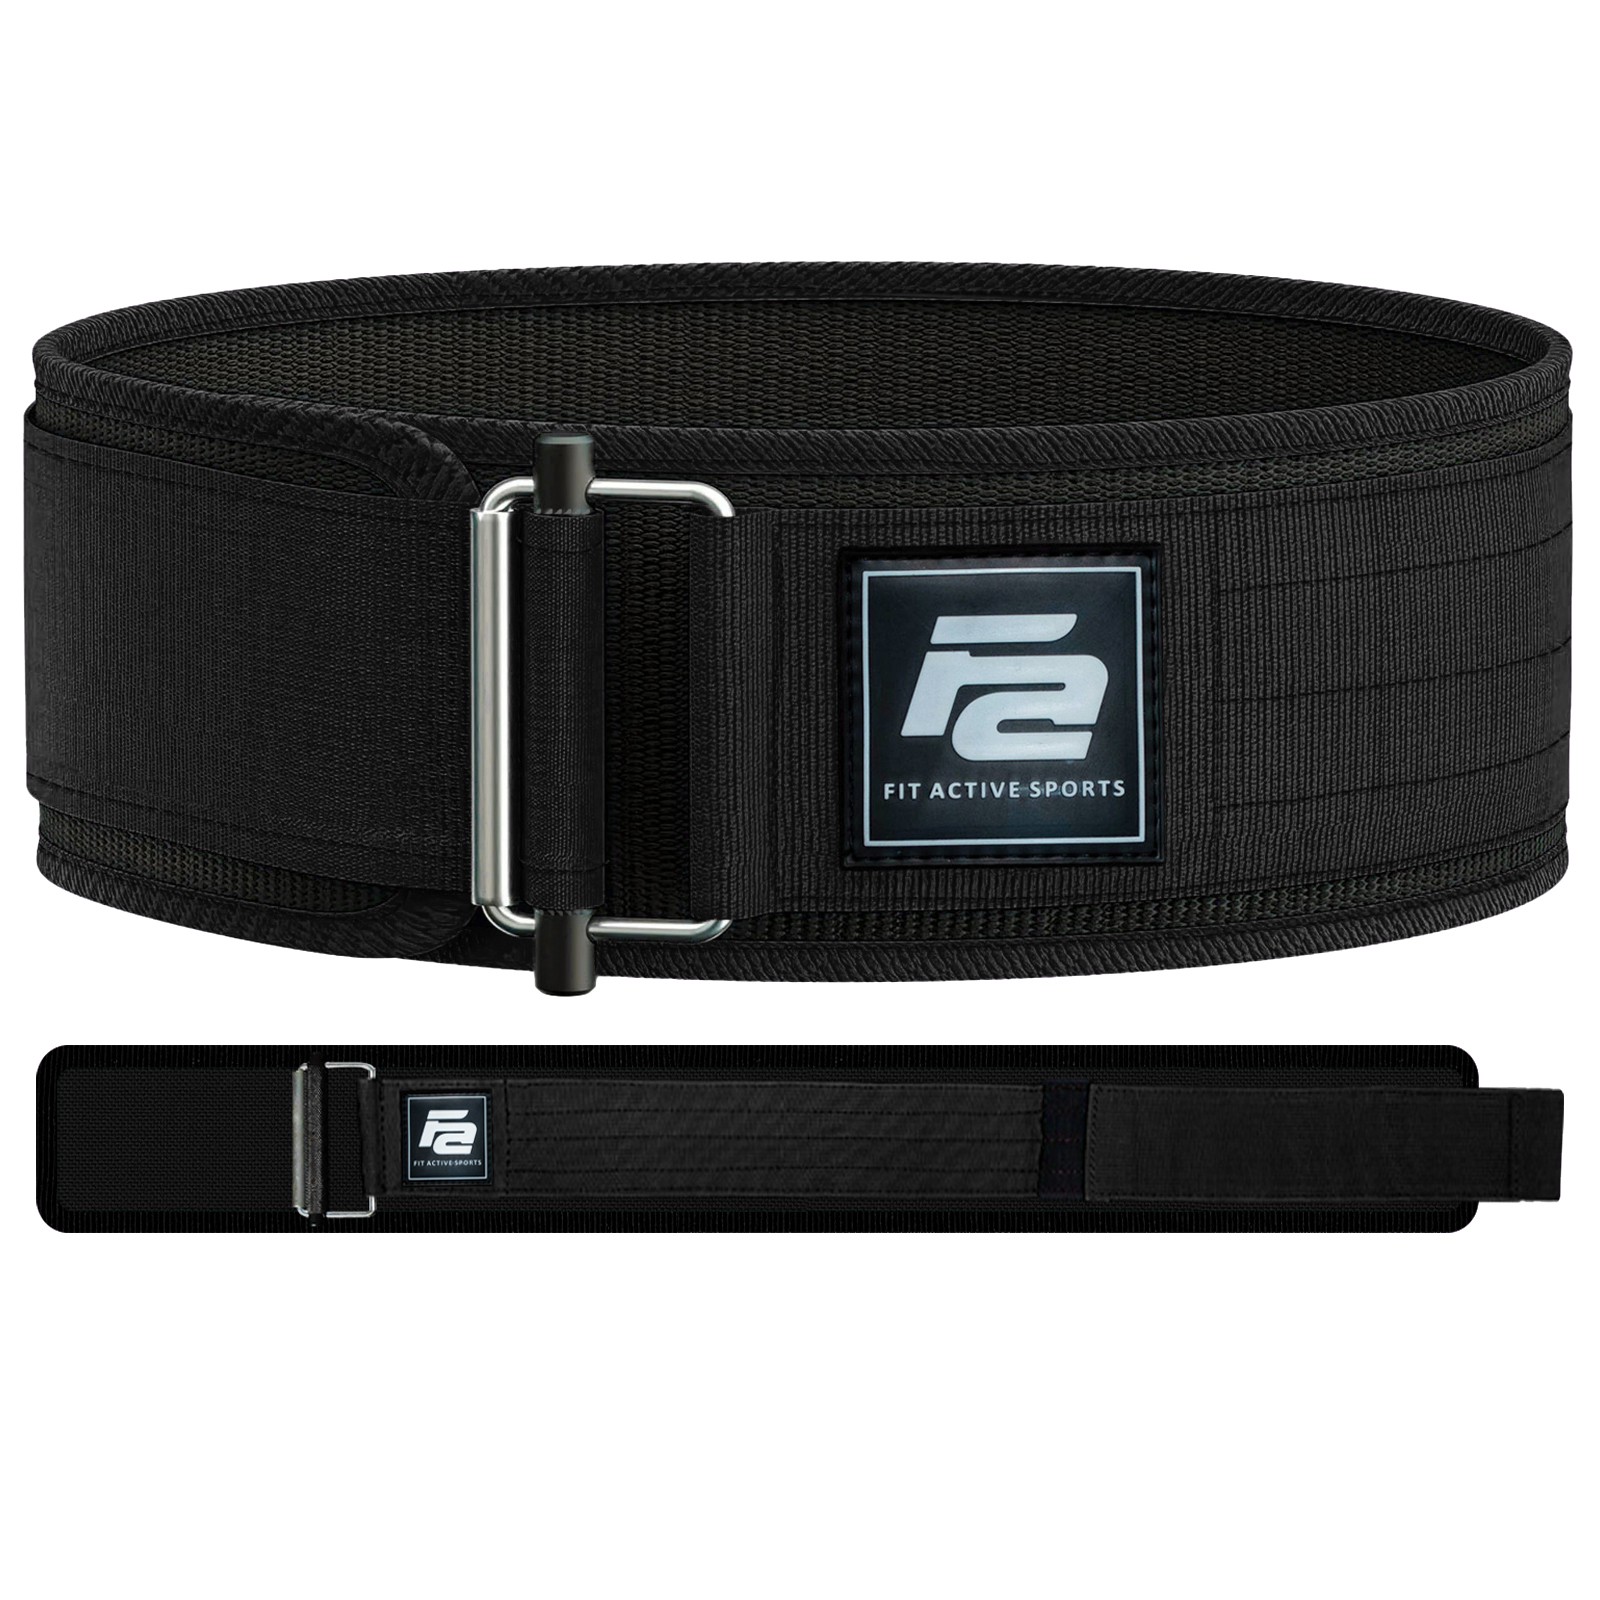 Closeup of Fit Active Sports black lever belt front and back